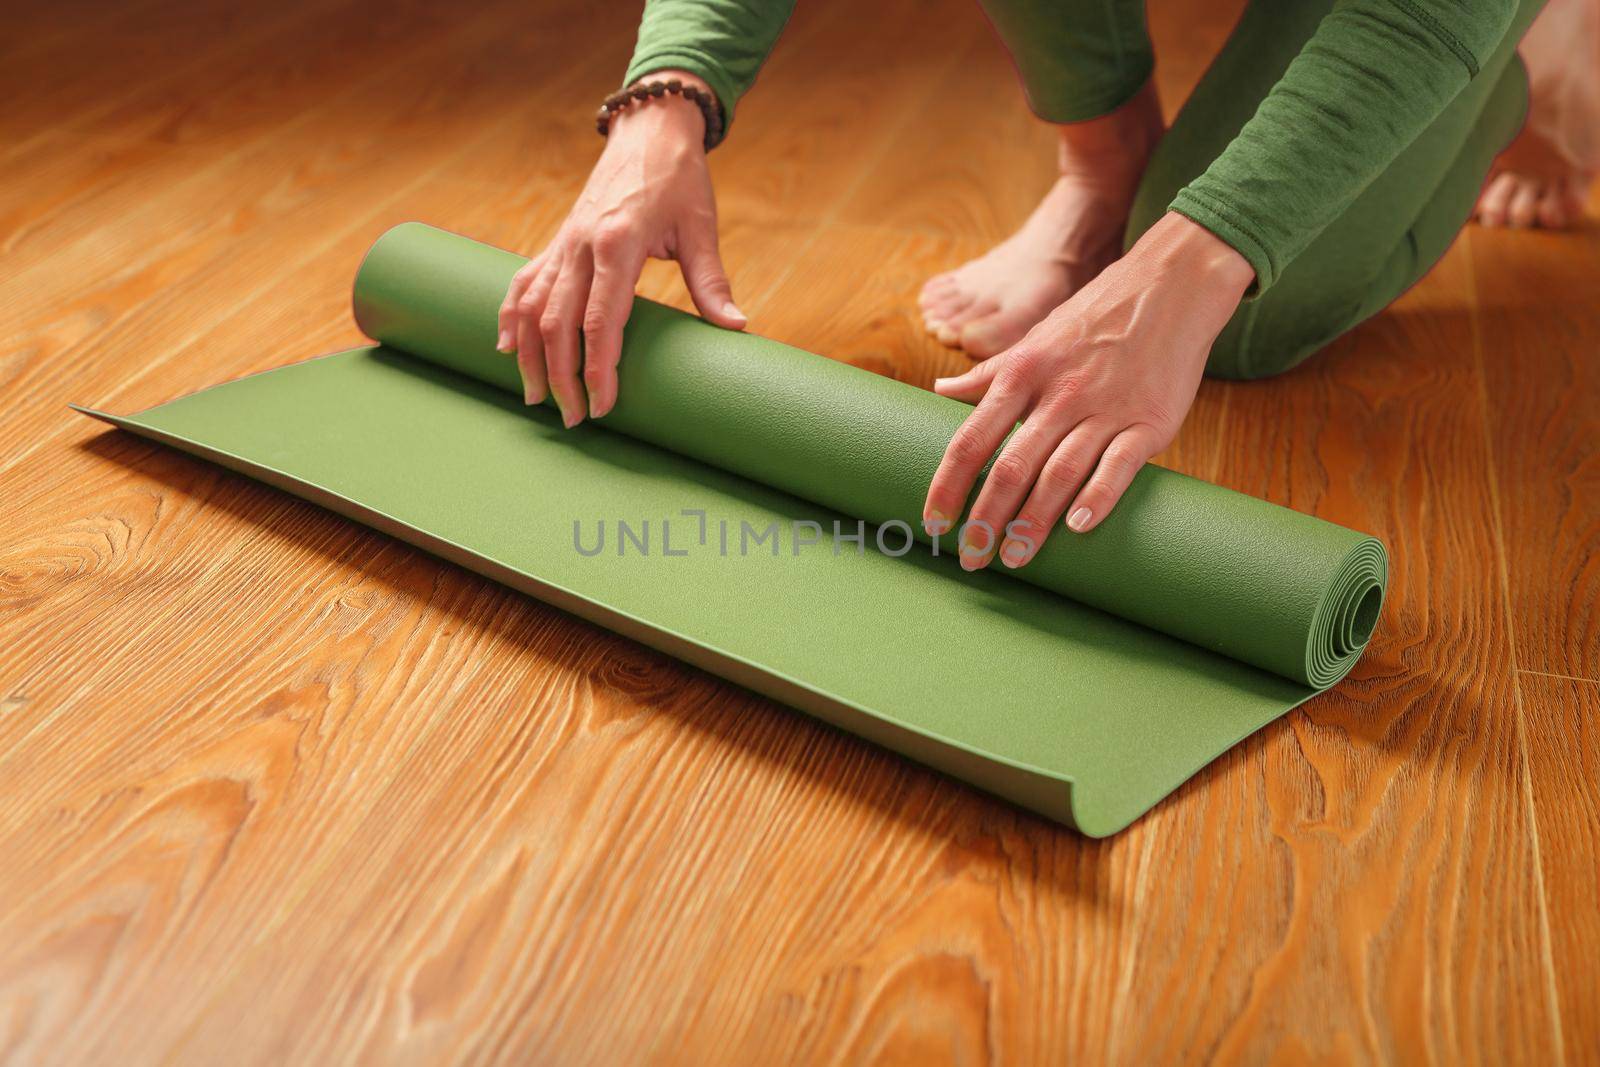 A woman collects a green mat after a yoga class by AlexGrec